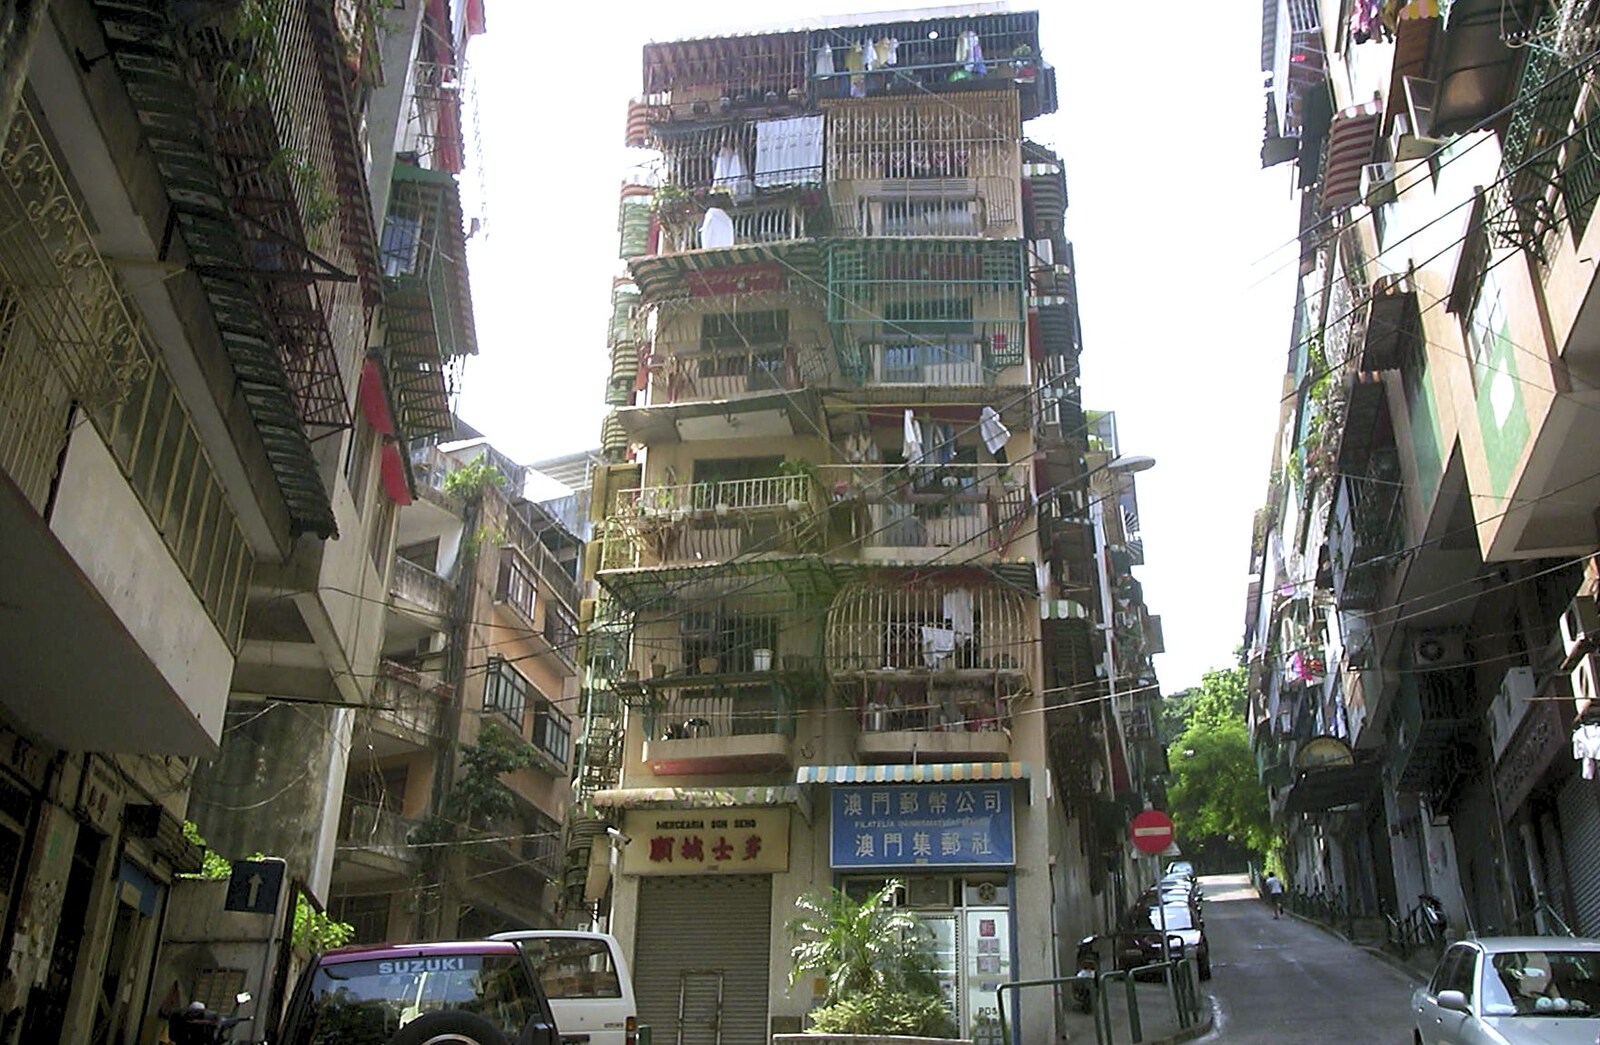 A Day Trip to Macau, China - 16th August 2001: Ramshackle houses